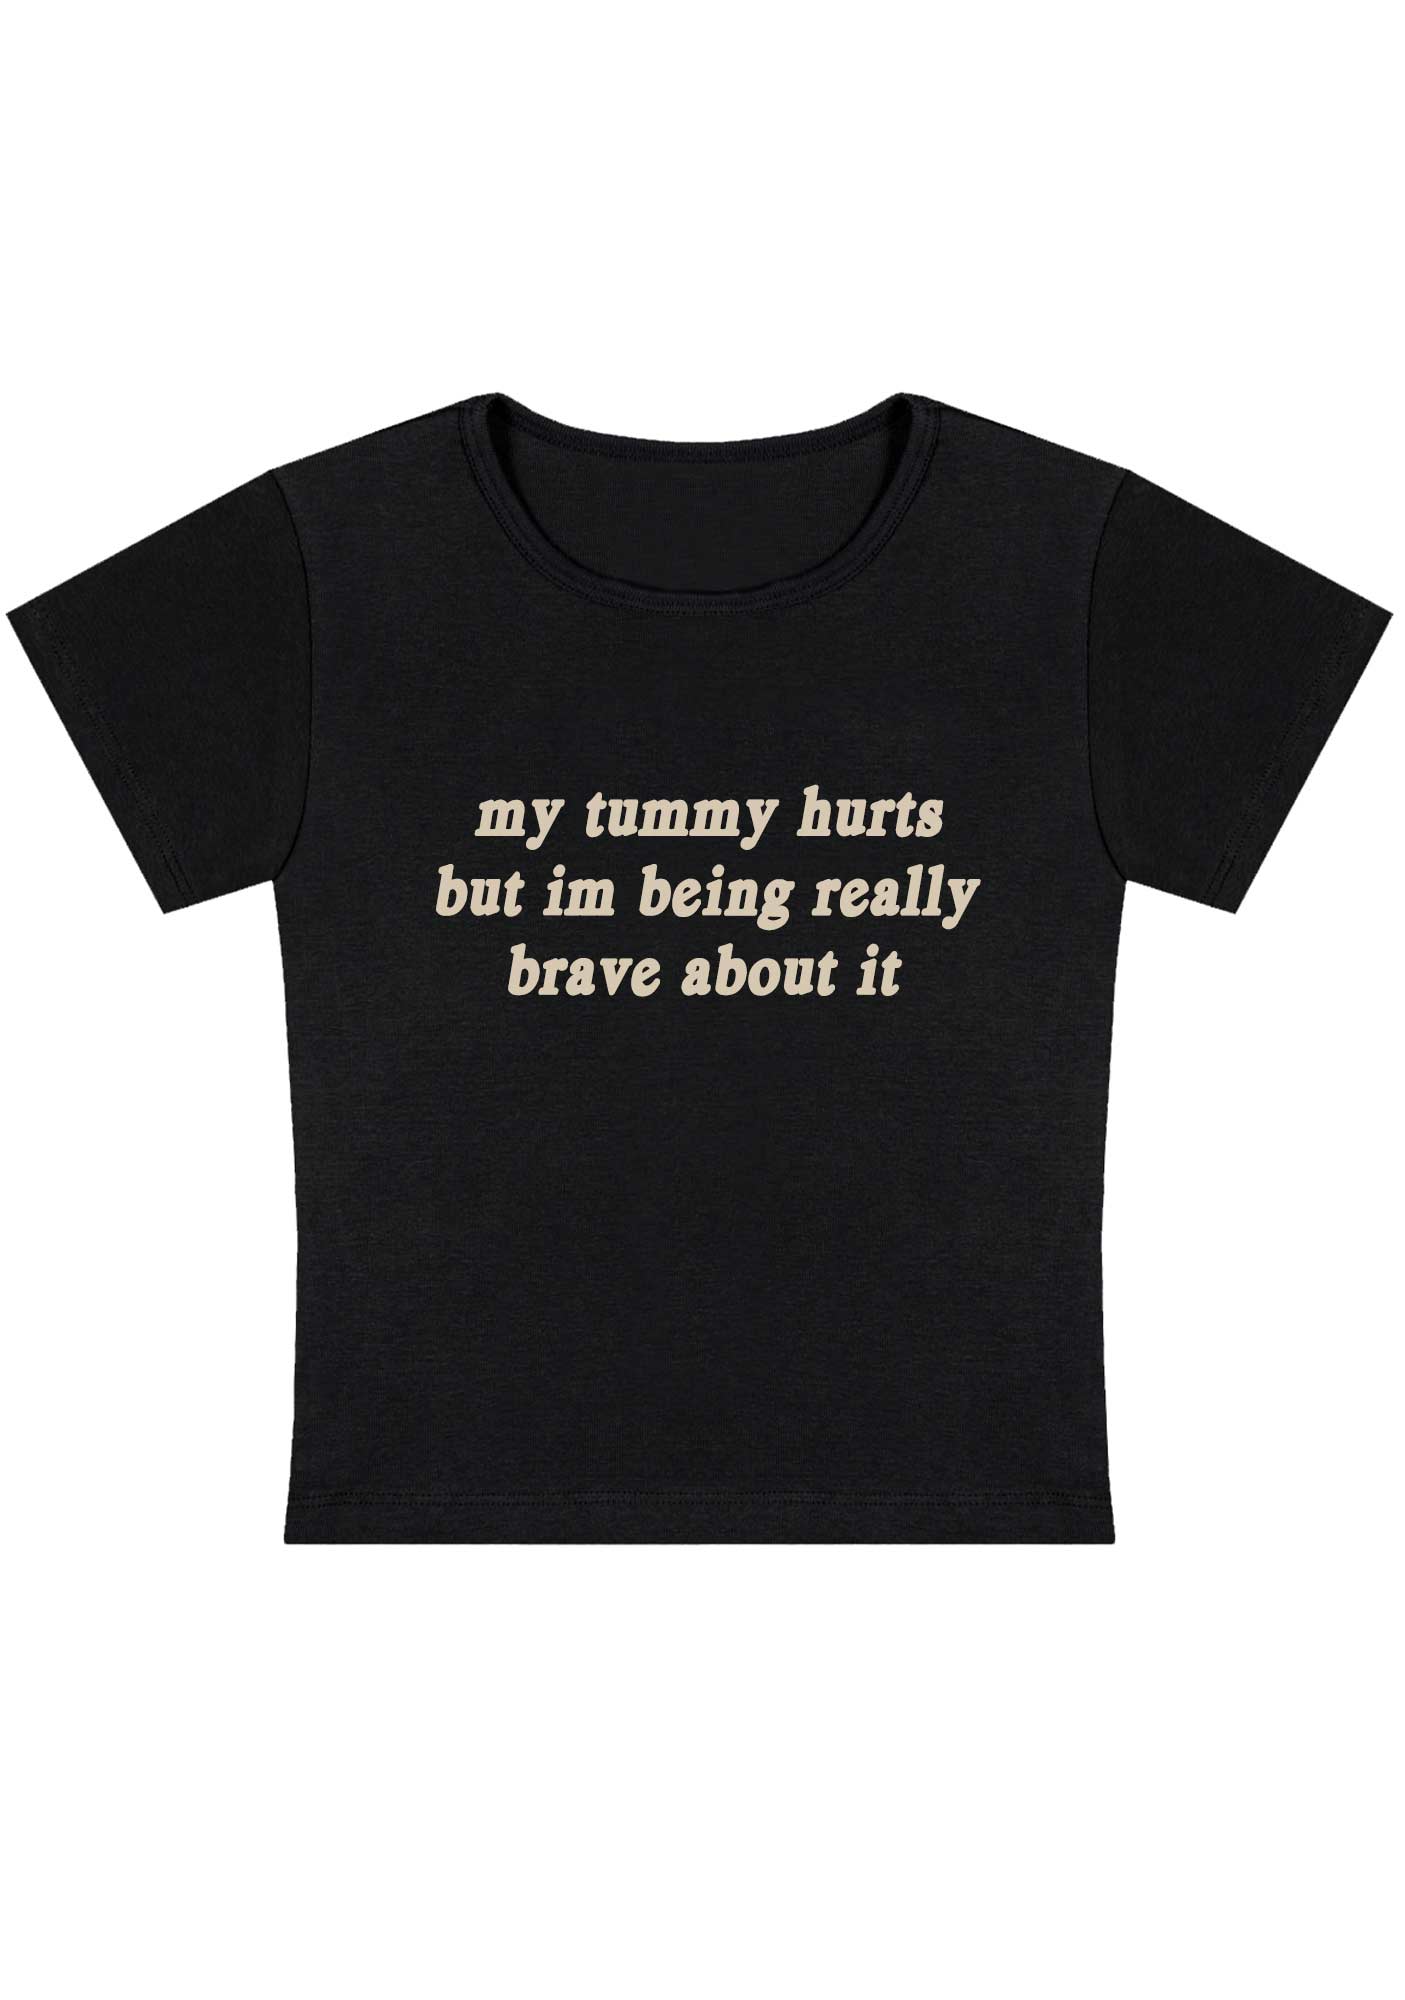 Cherrykitten Im Being Really Brave About It Y2K Baby Tee for Sale